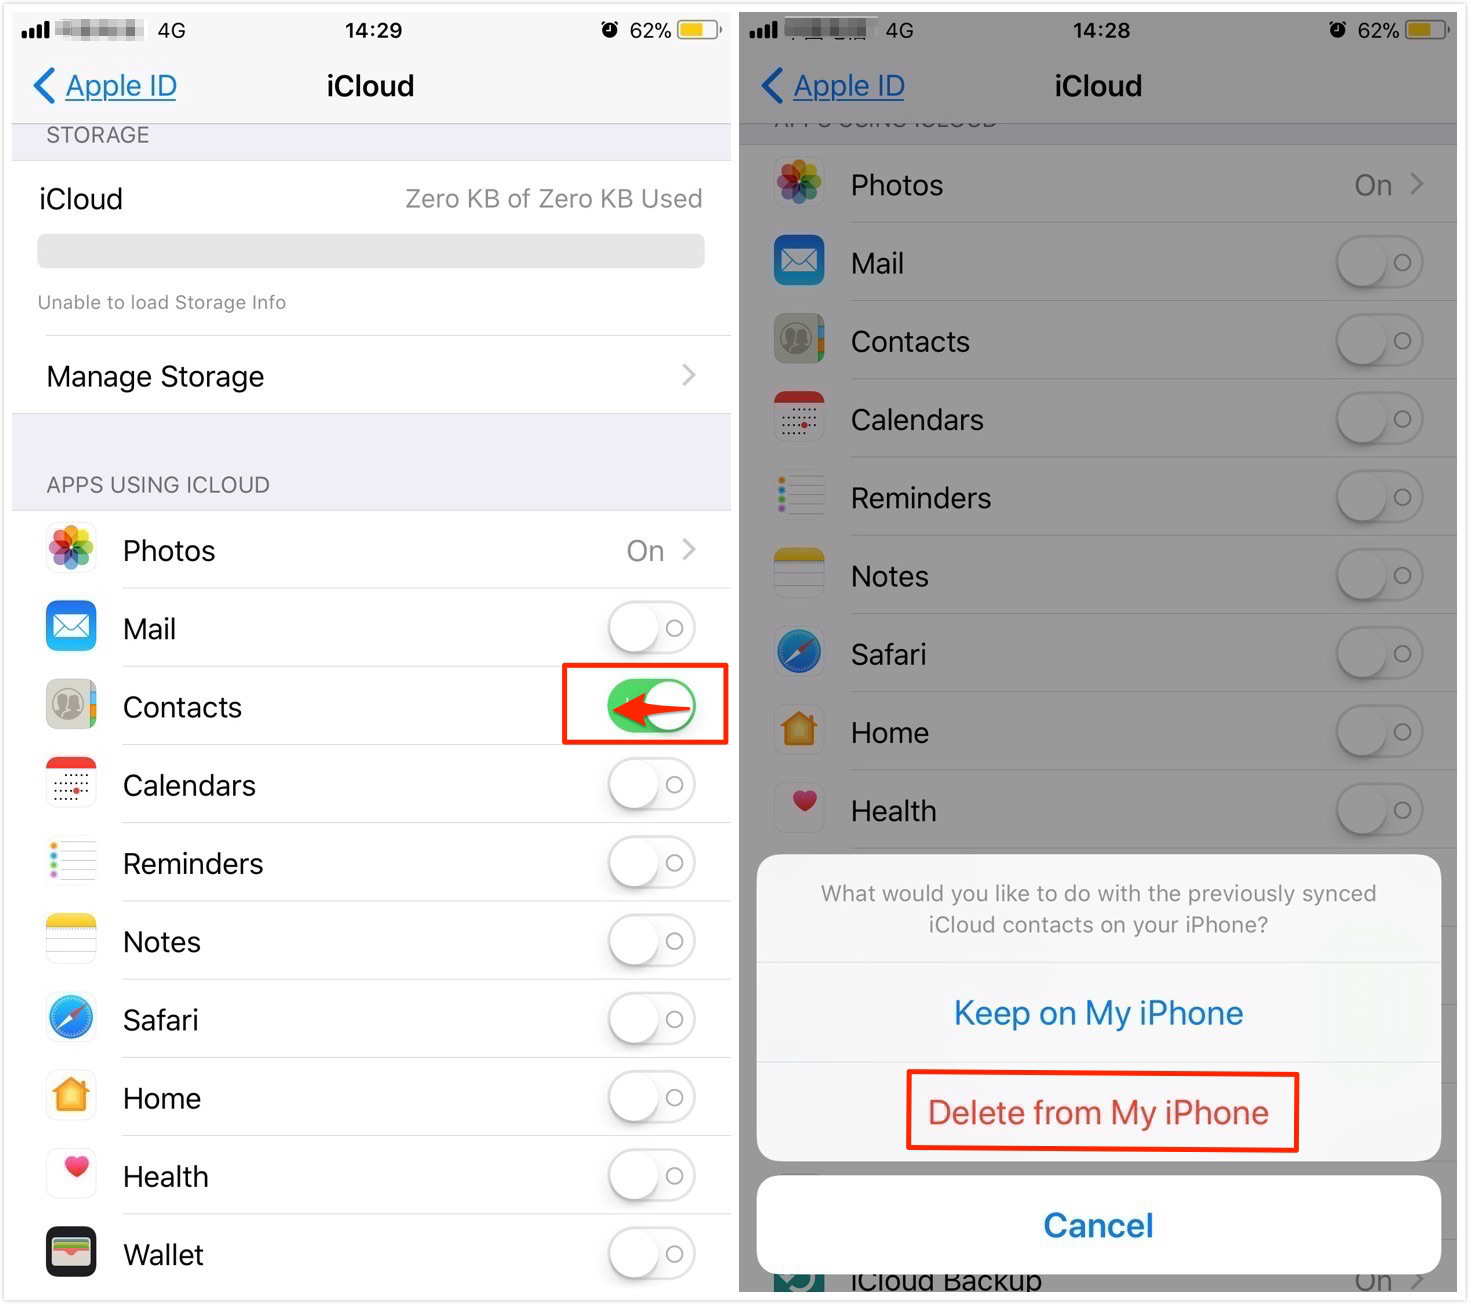 How to delete contacts in iphone